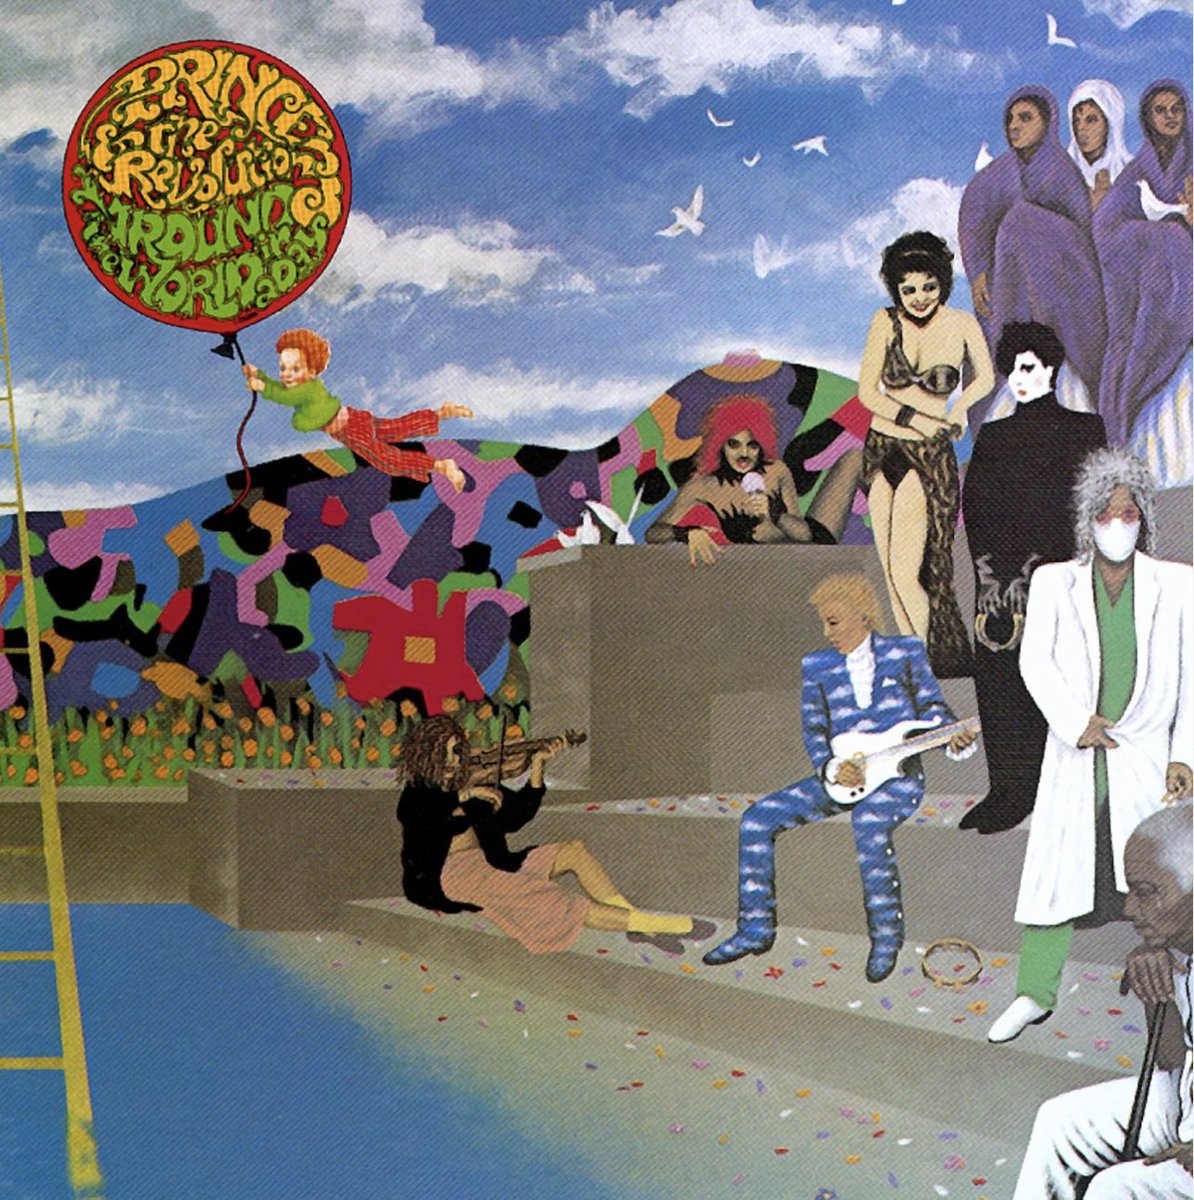 Prince’s ’Around The World In A Day’ album cover (1985). 

Person on the right with a lab coat and a mask.